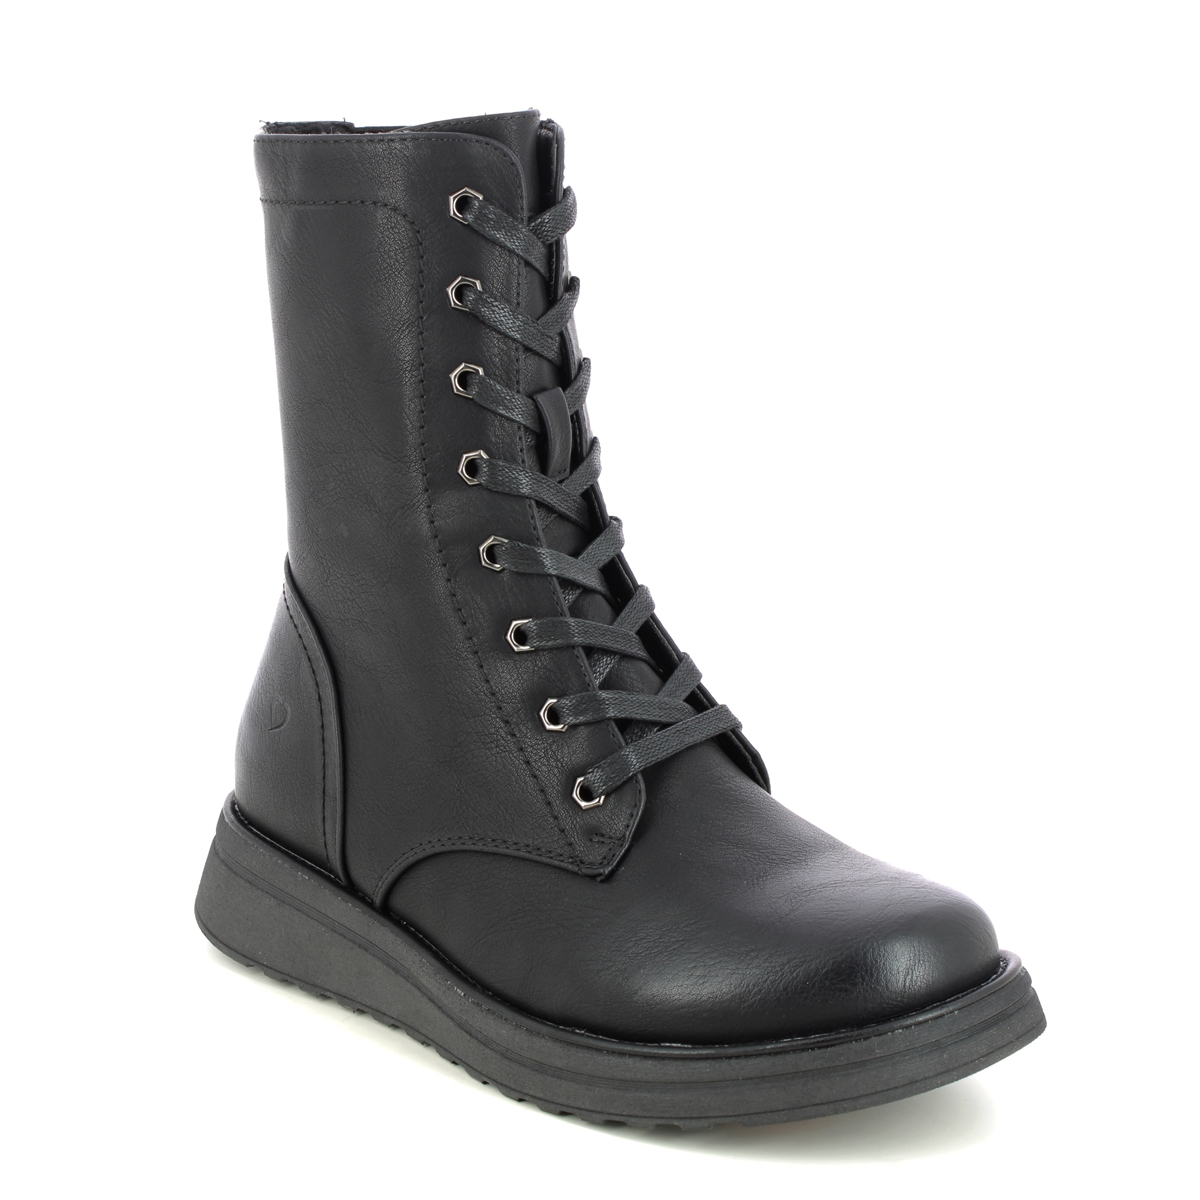 Heavenly Feet Martina Walker Black Womens Lace Up Boots 3509-34 In Size 4 In Plain Black